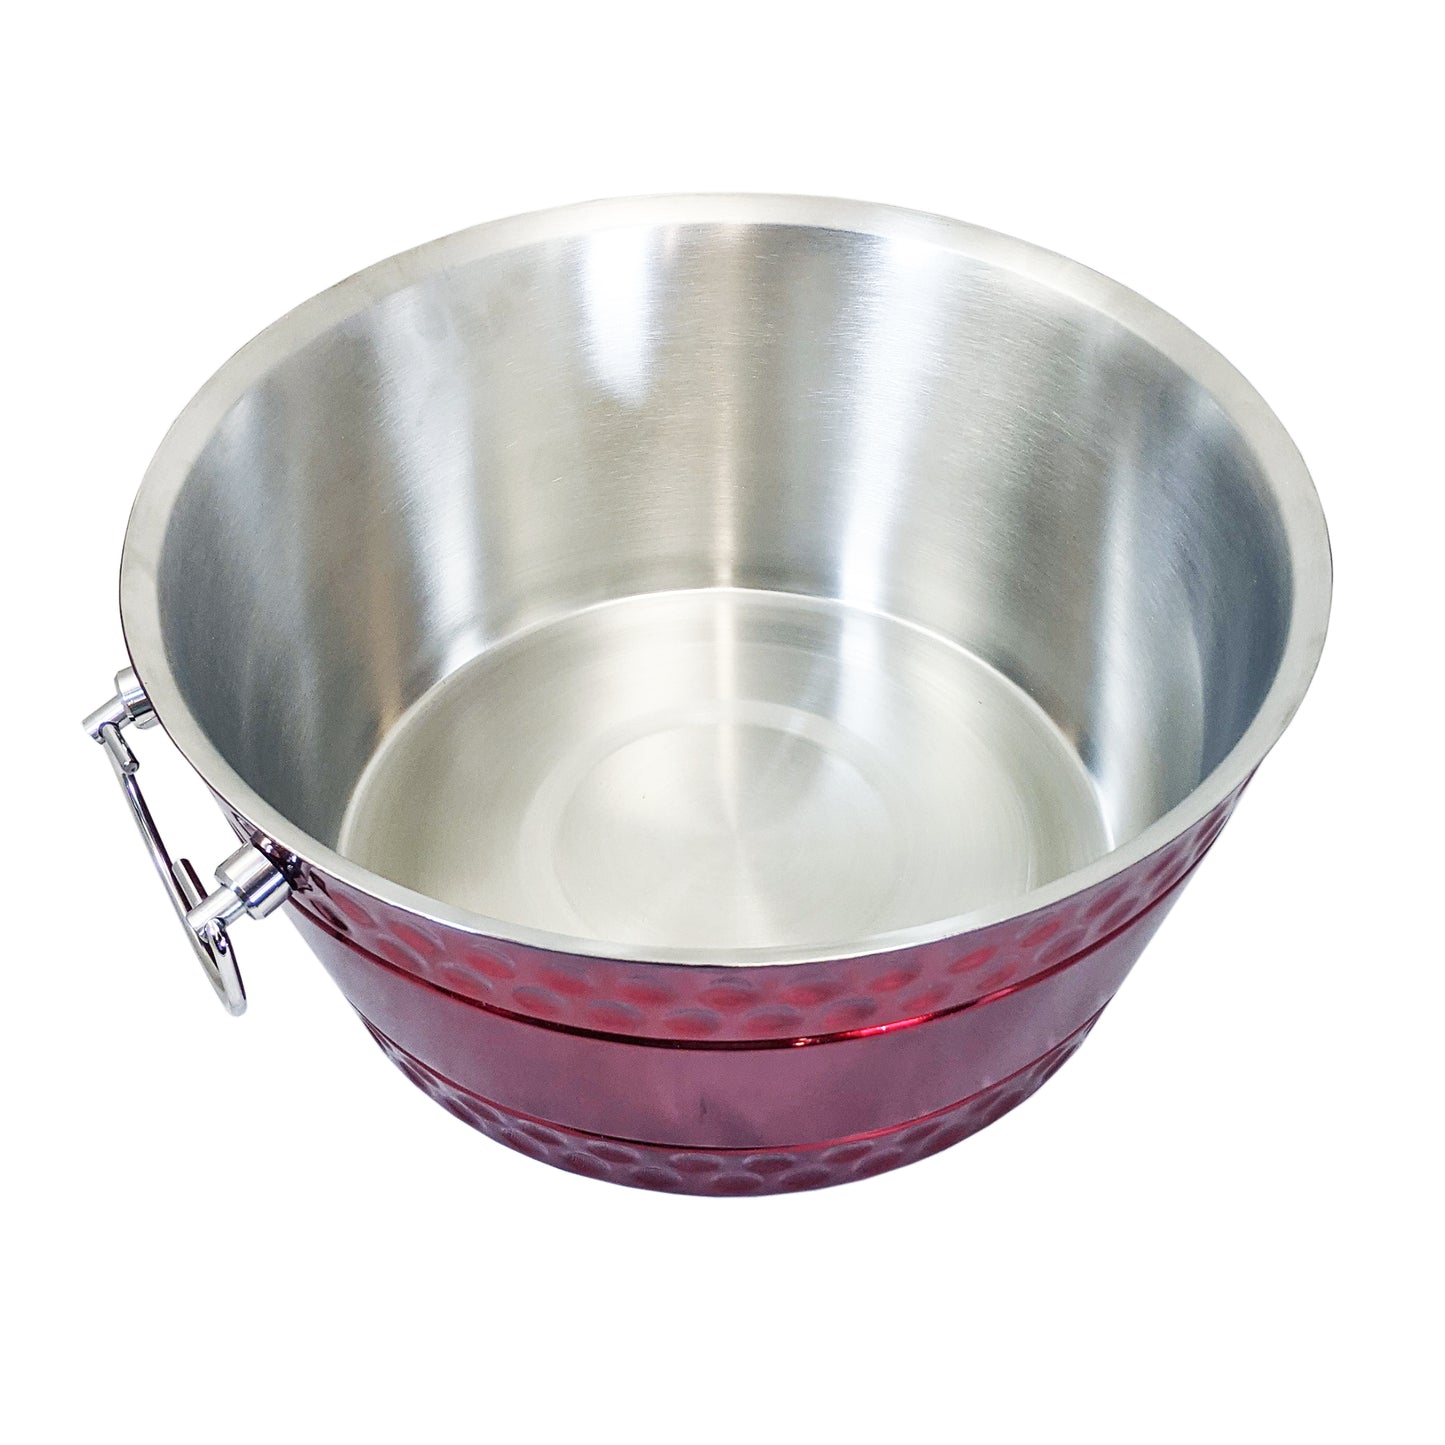 Round red beverage tub insulated and 100% leak proof.  Made of premium stainless steel and used to chill wine, drinks, champagne, or beer at parties in the home, in the restaurant, or at special events.  The red color is perfect for holiday parties for 4th of July and Christmas celebrations.